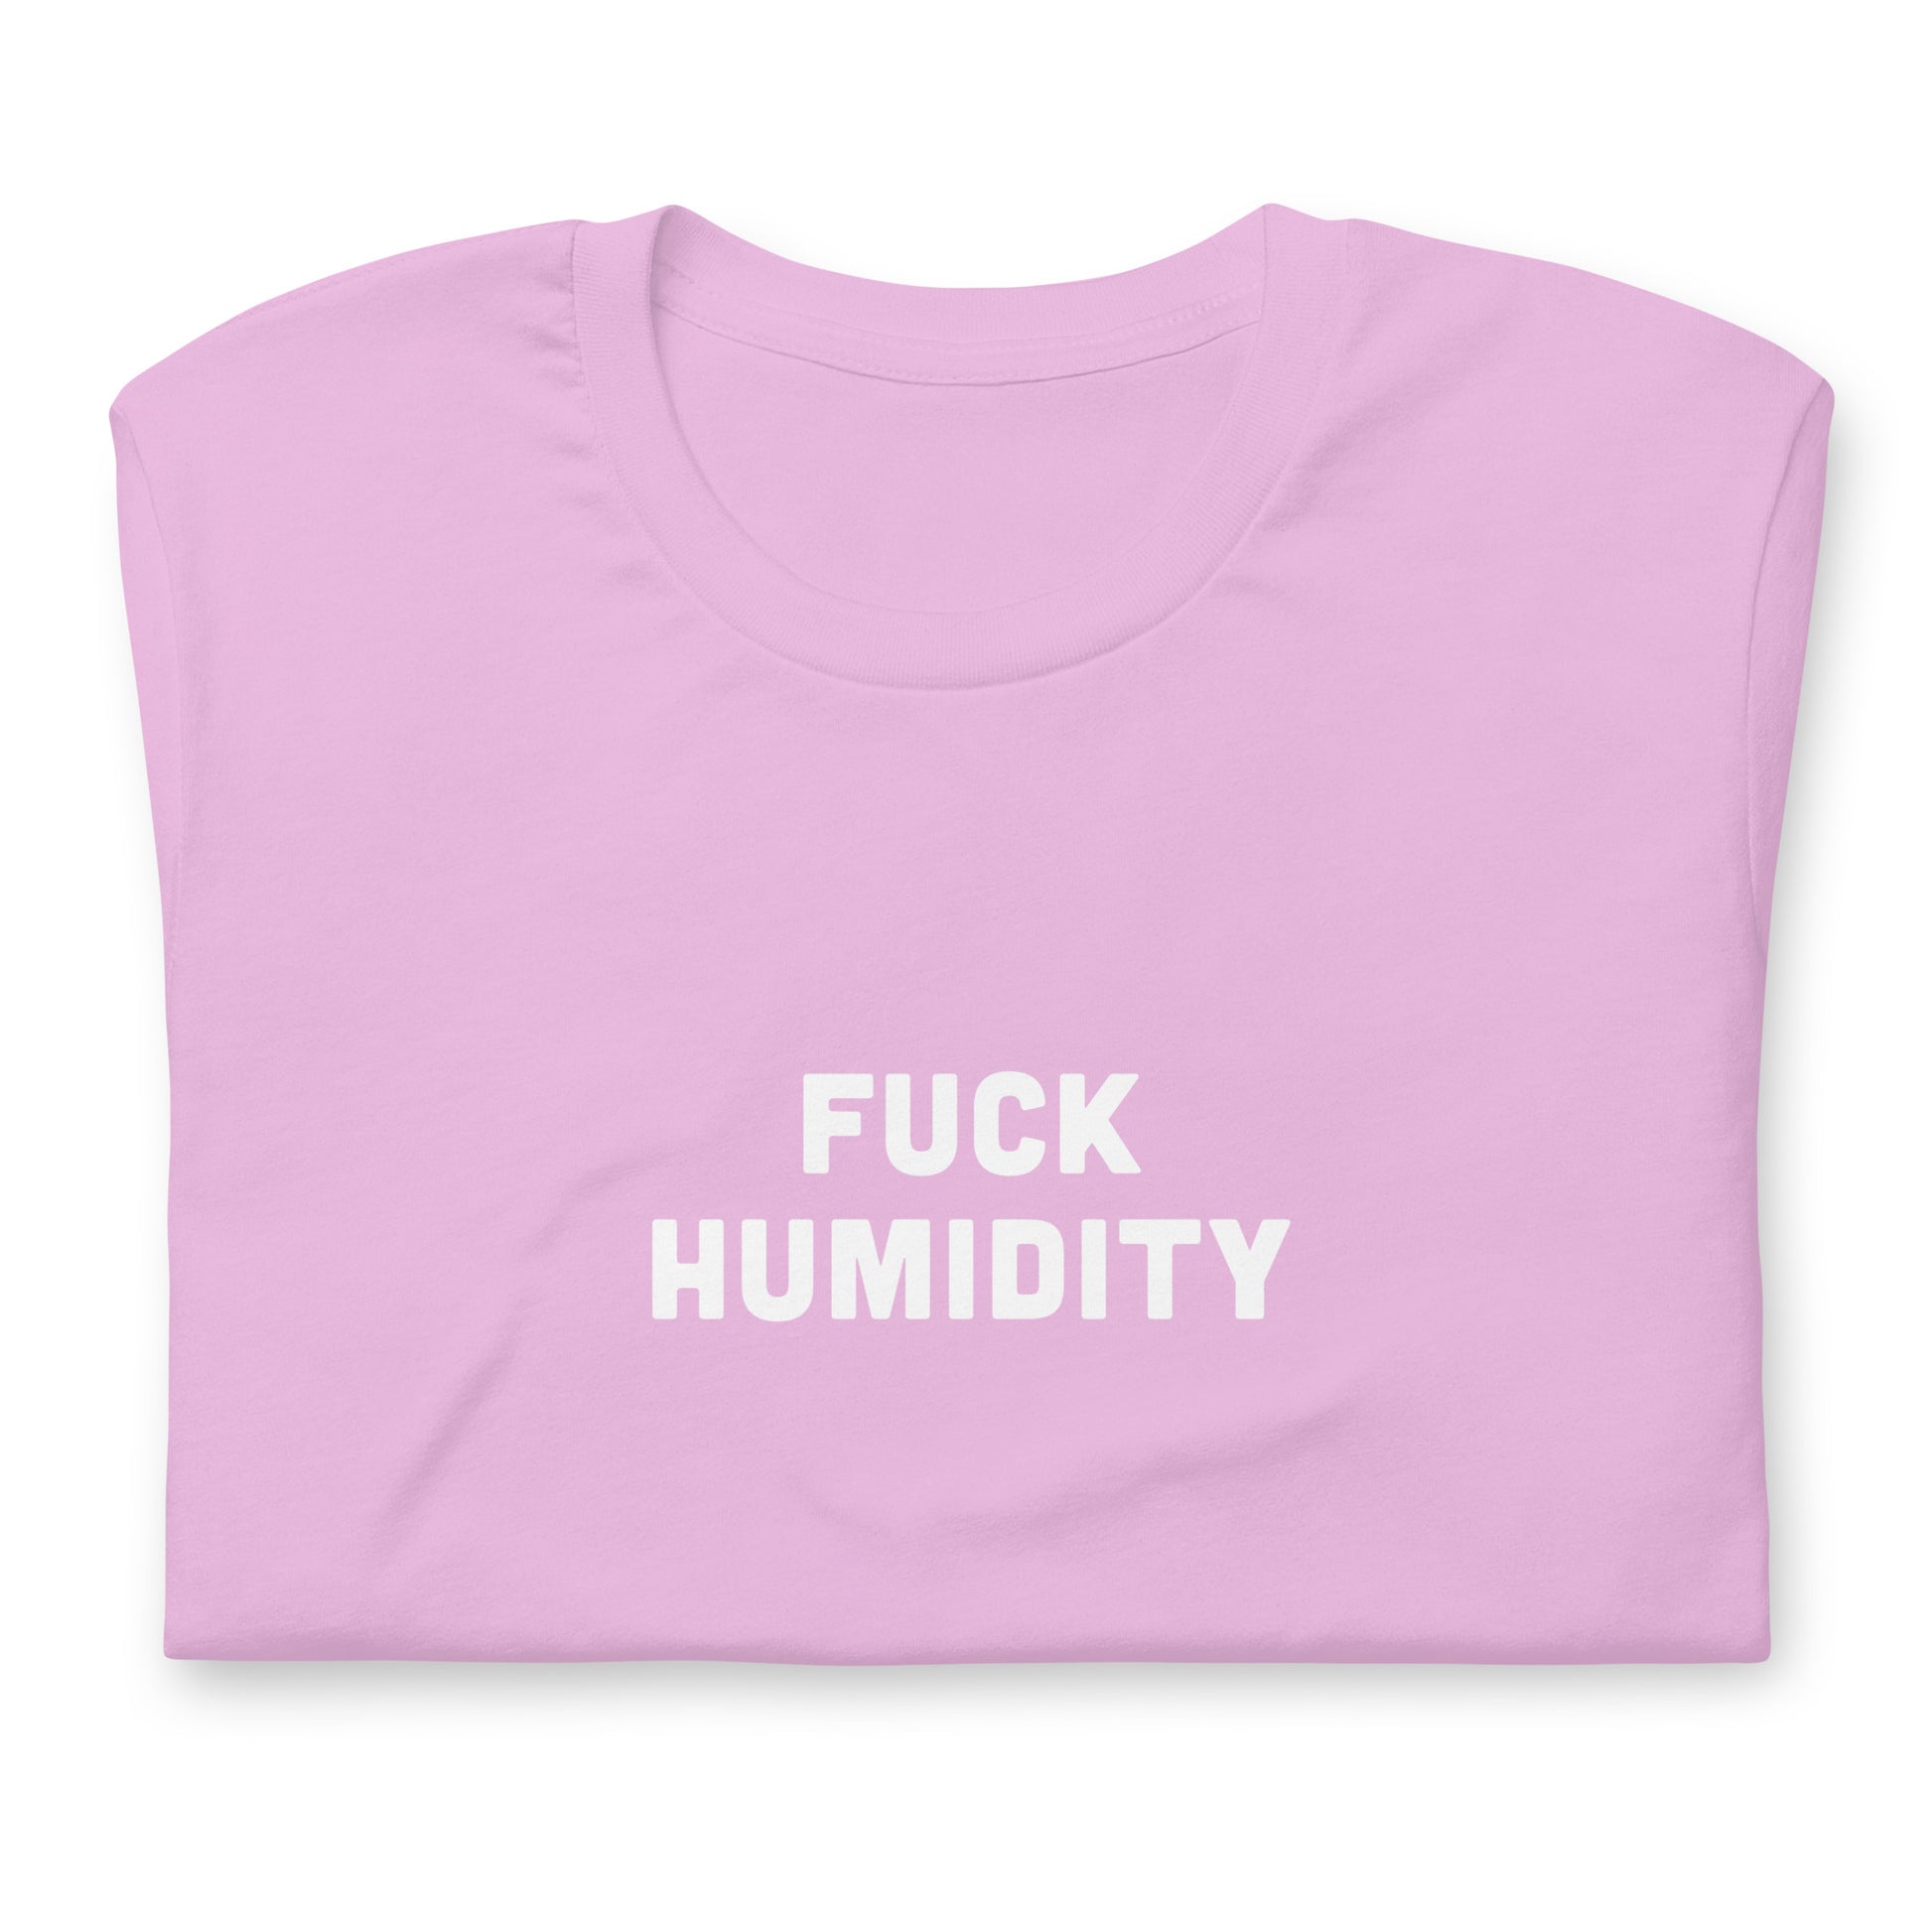 Fuck Humidity T-Shirt Size 2XL Color Forest